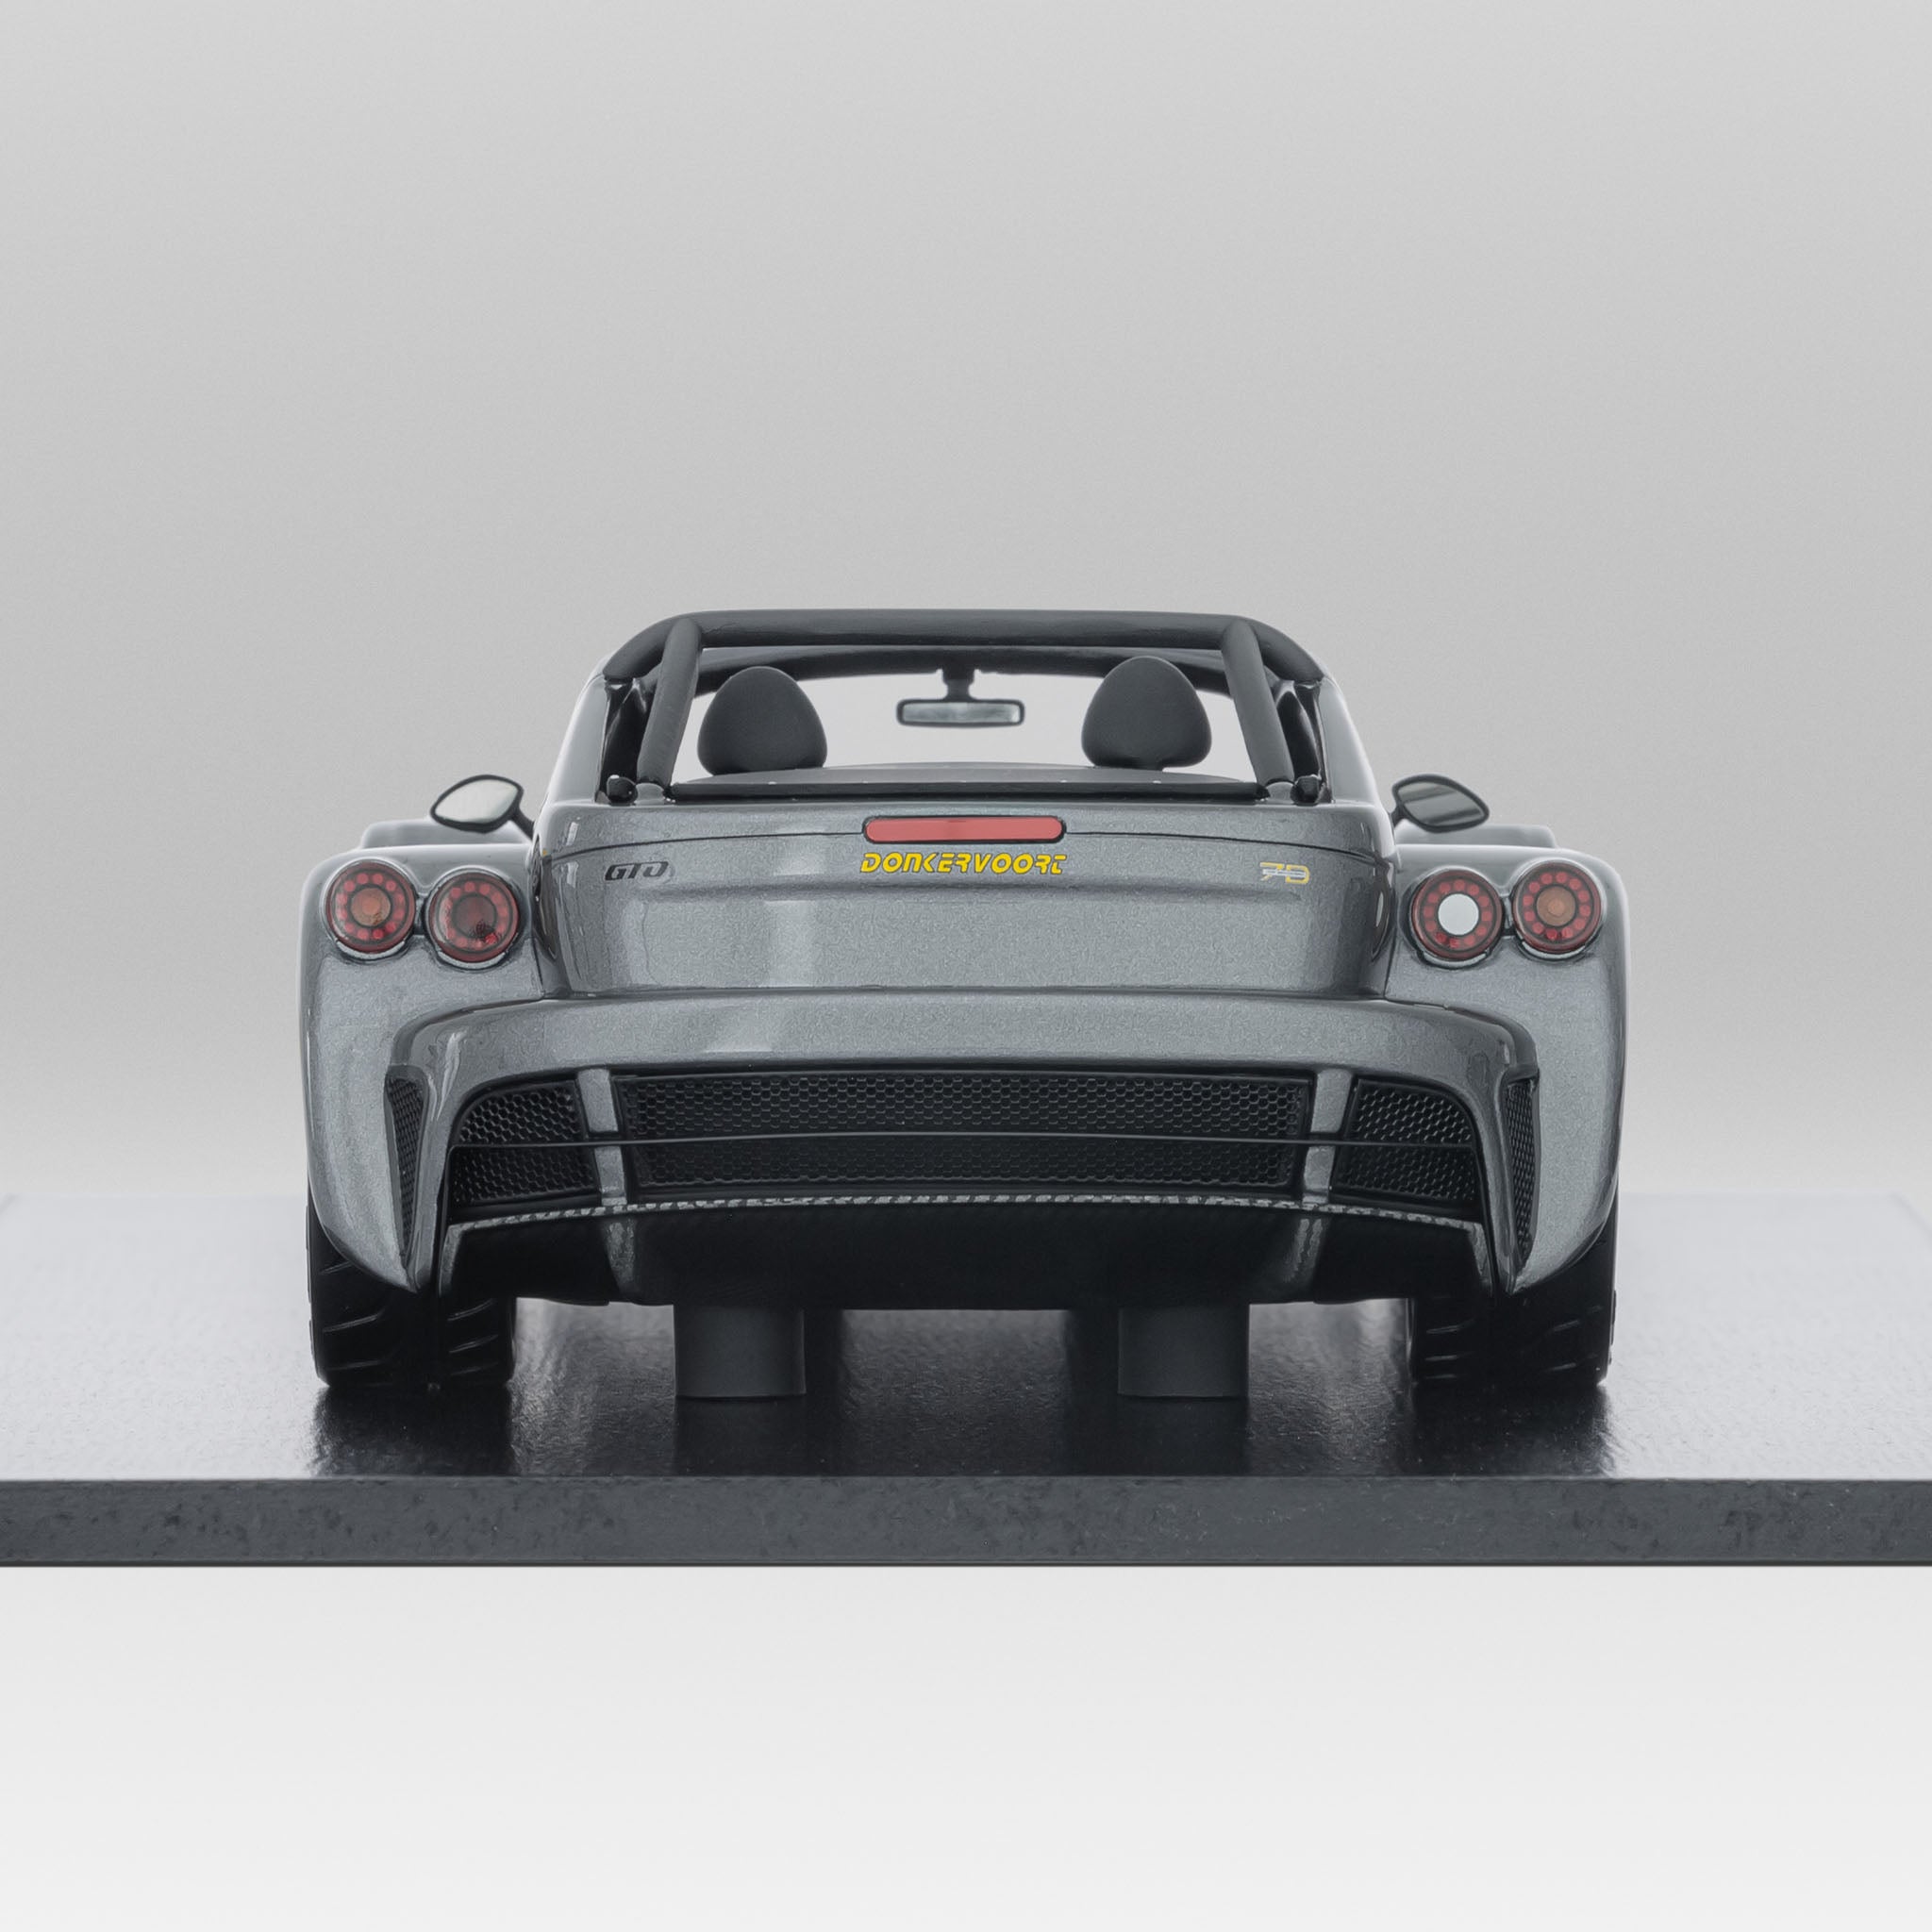 Donkervoort D8 GTO-JD70 1:18 // Anthracite